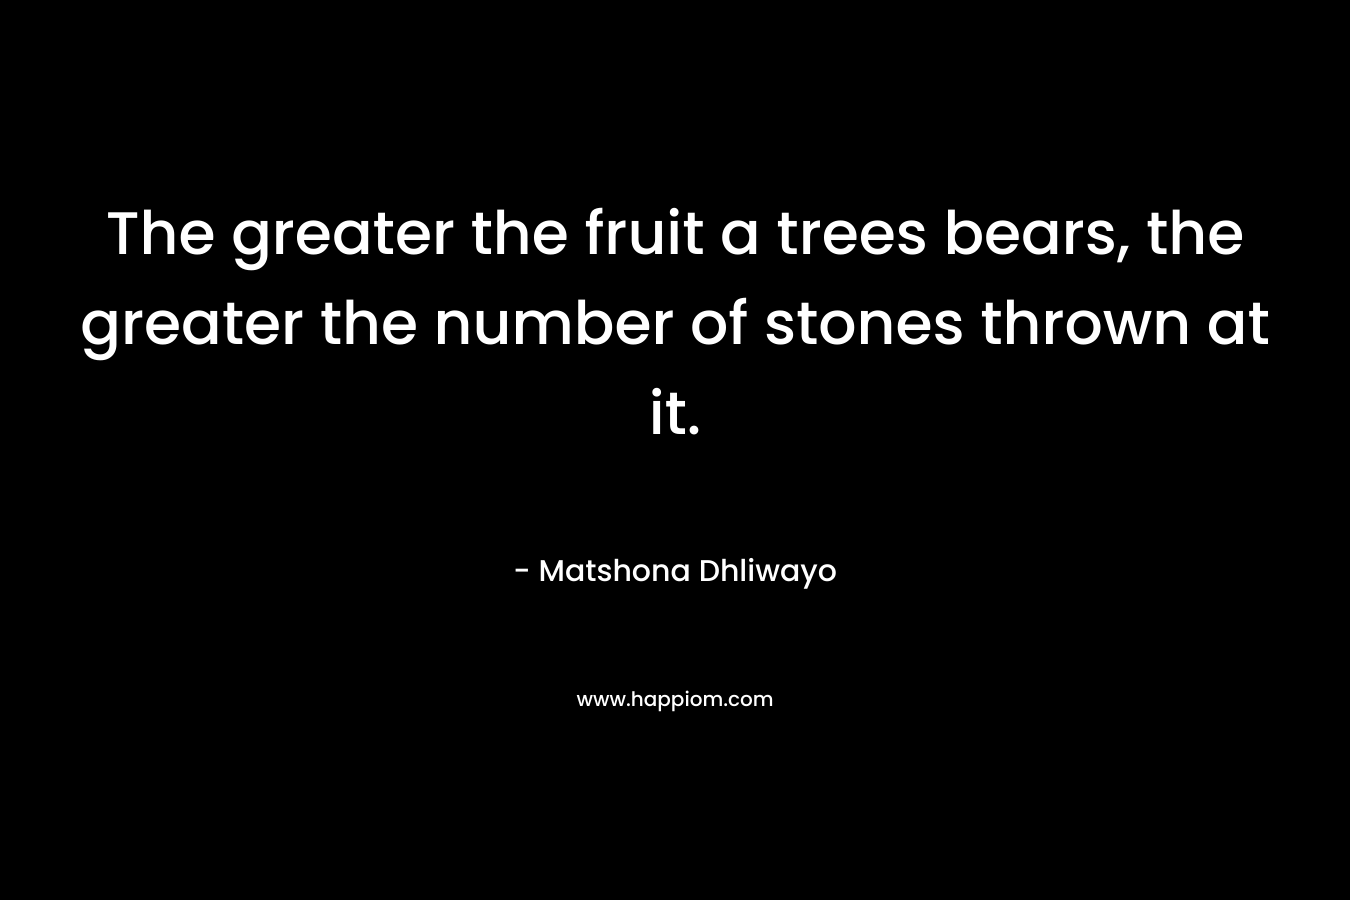 The greater the fruit a trees bears, the greater the number of stones thrown at it.